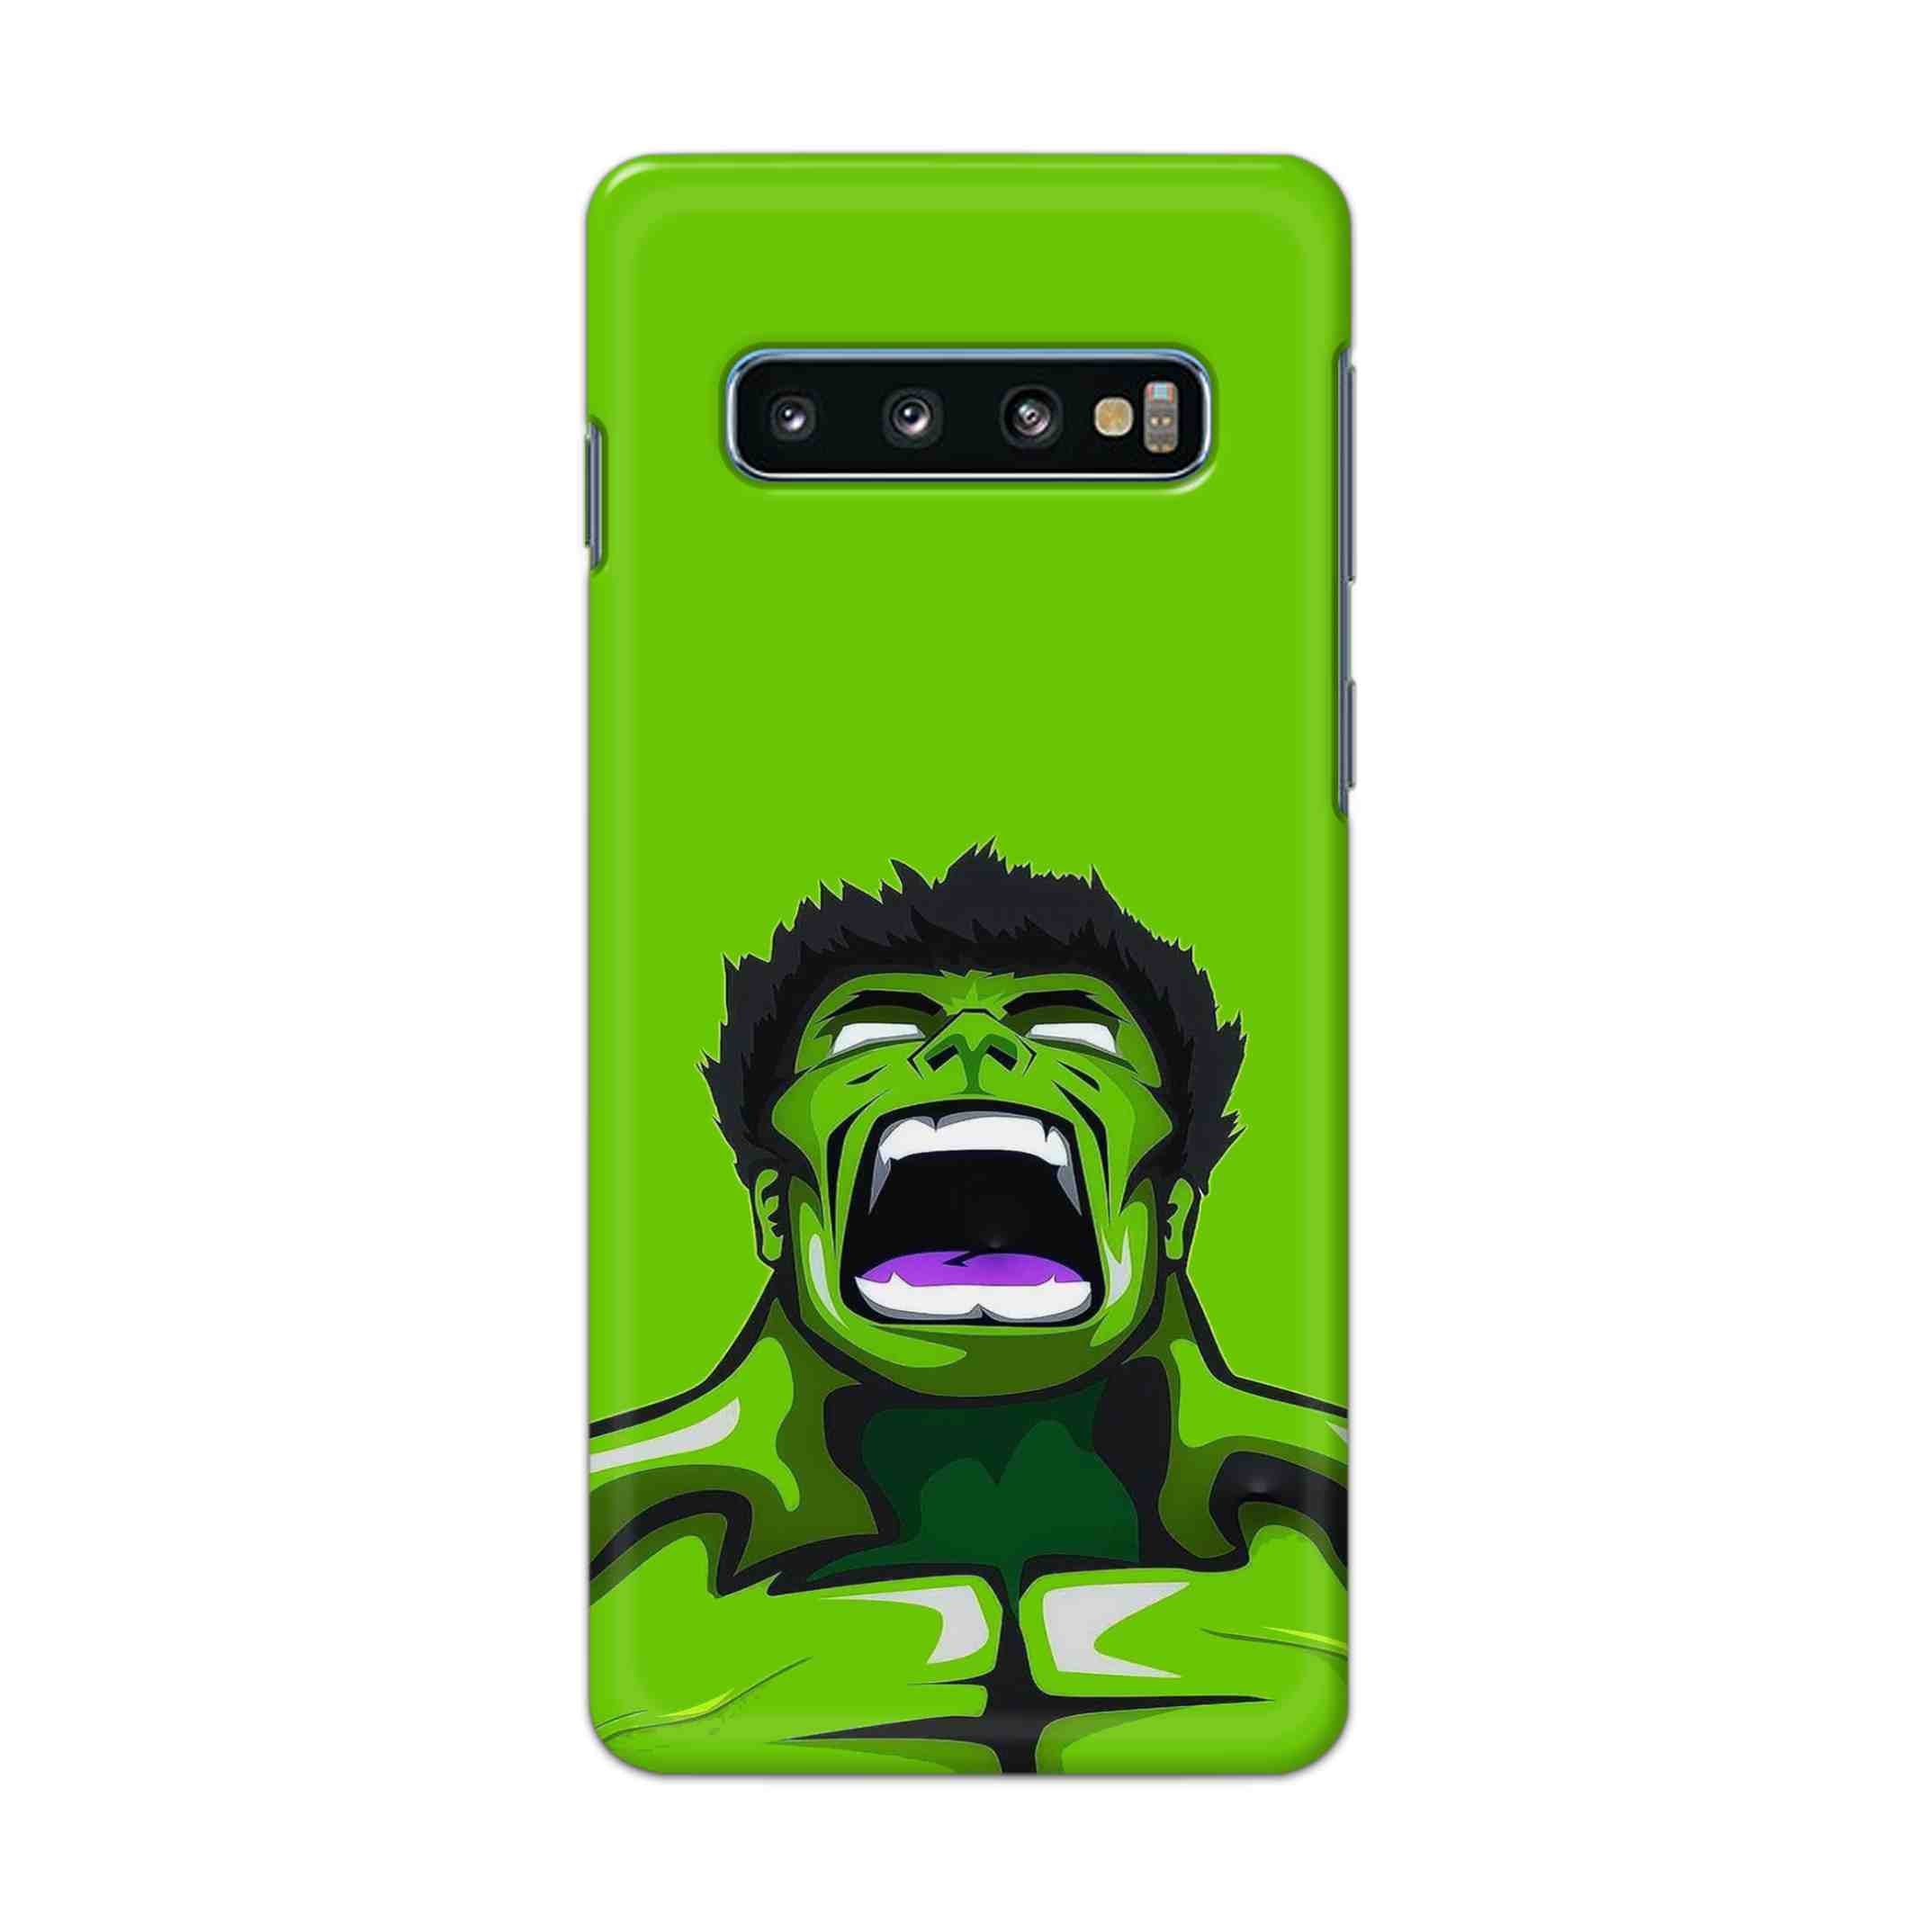 Buy Green Hulk Hard Back Mobile Phone Case Cover For Samsung Galaxy S10 Plus Online